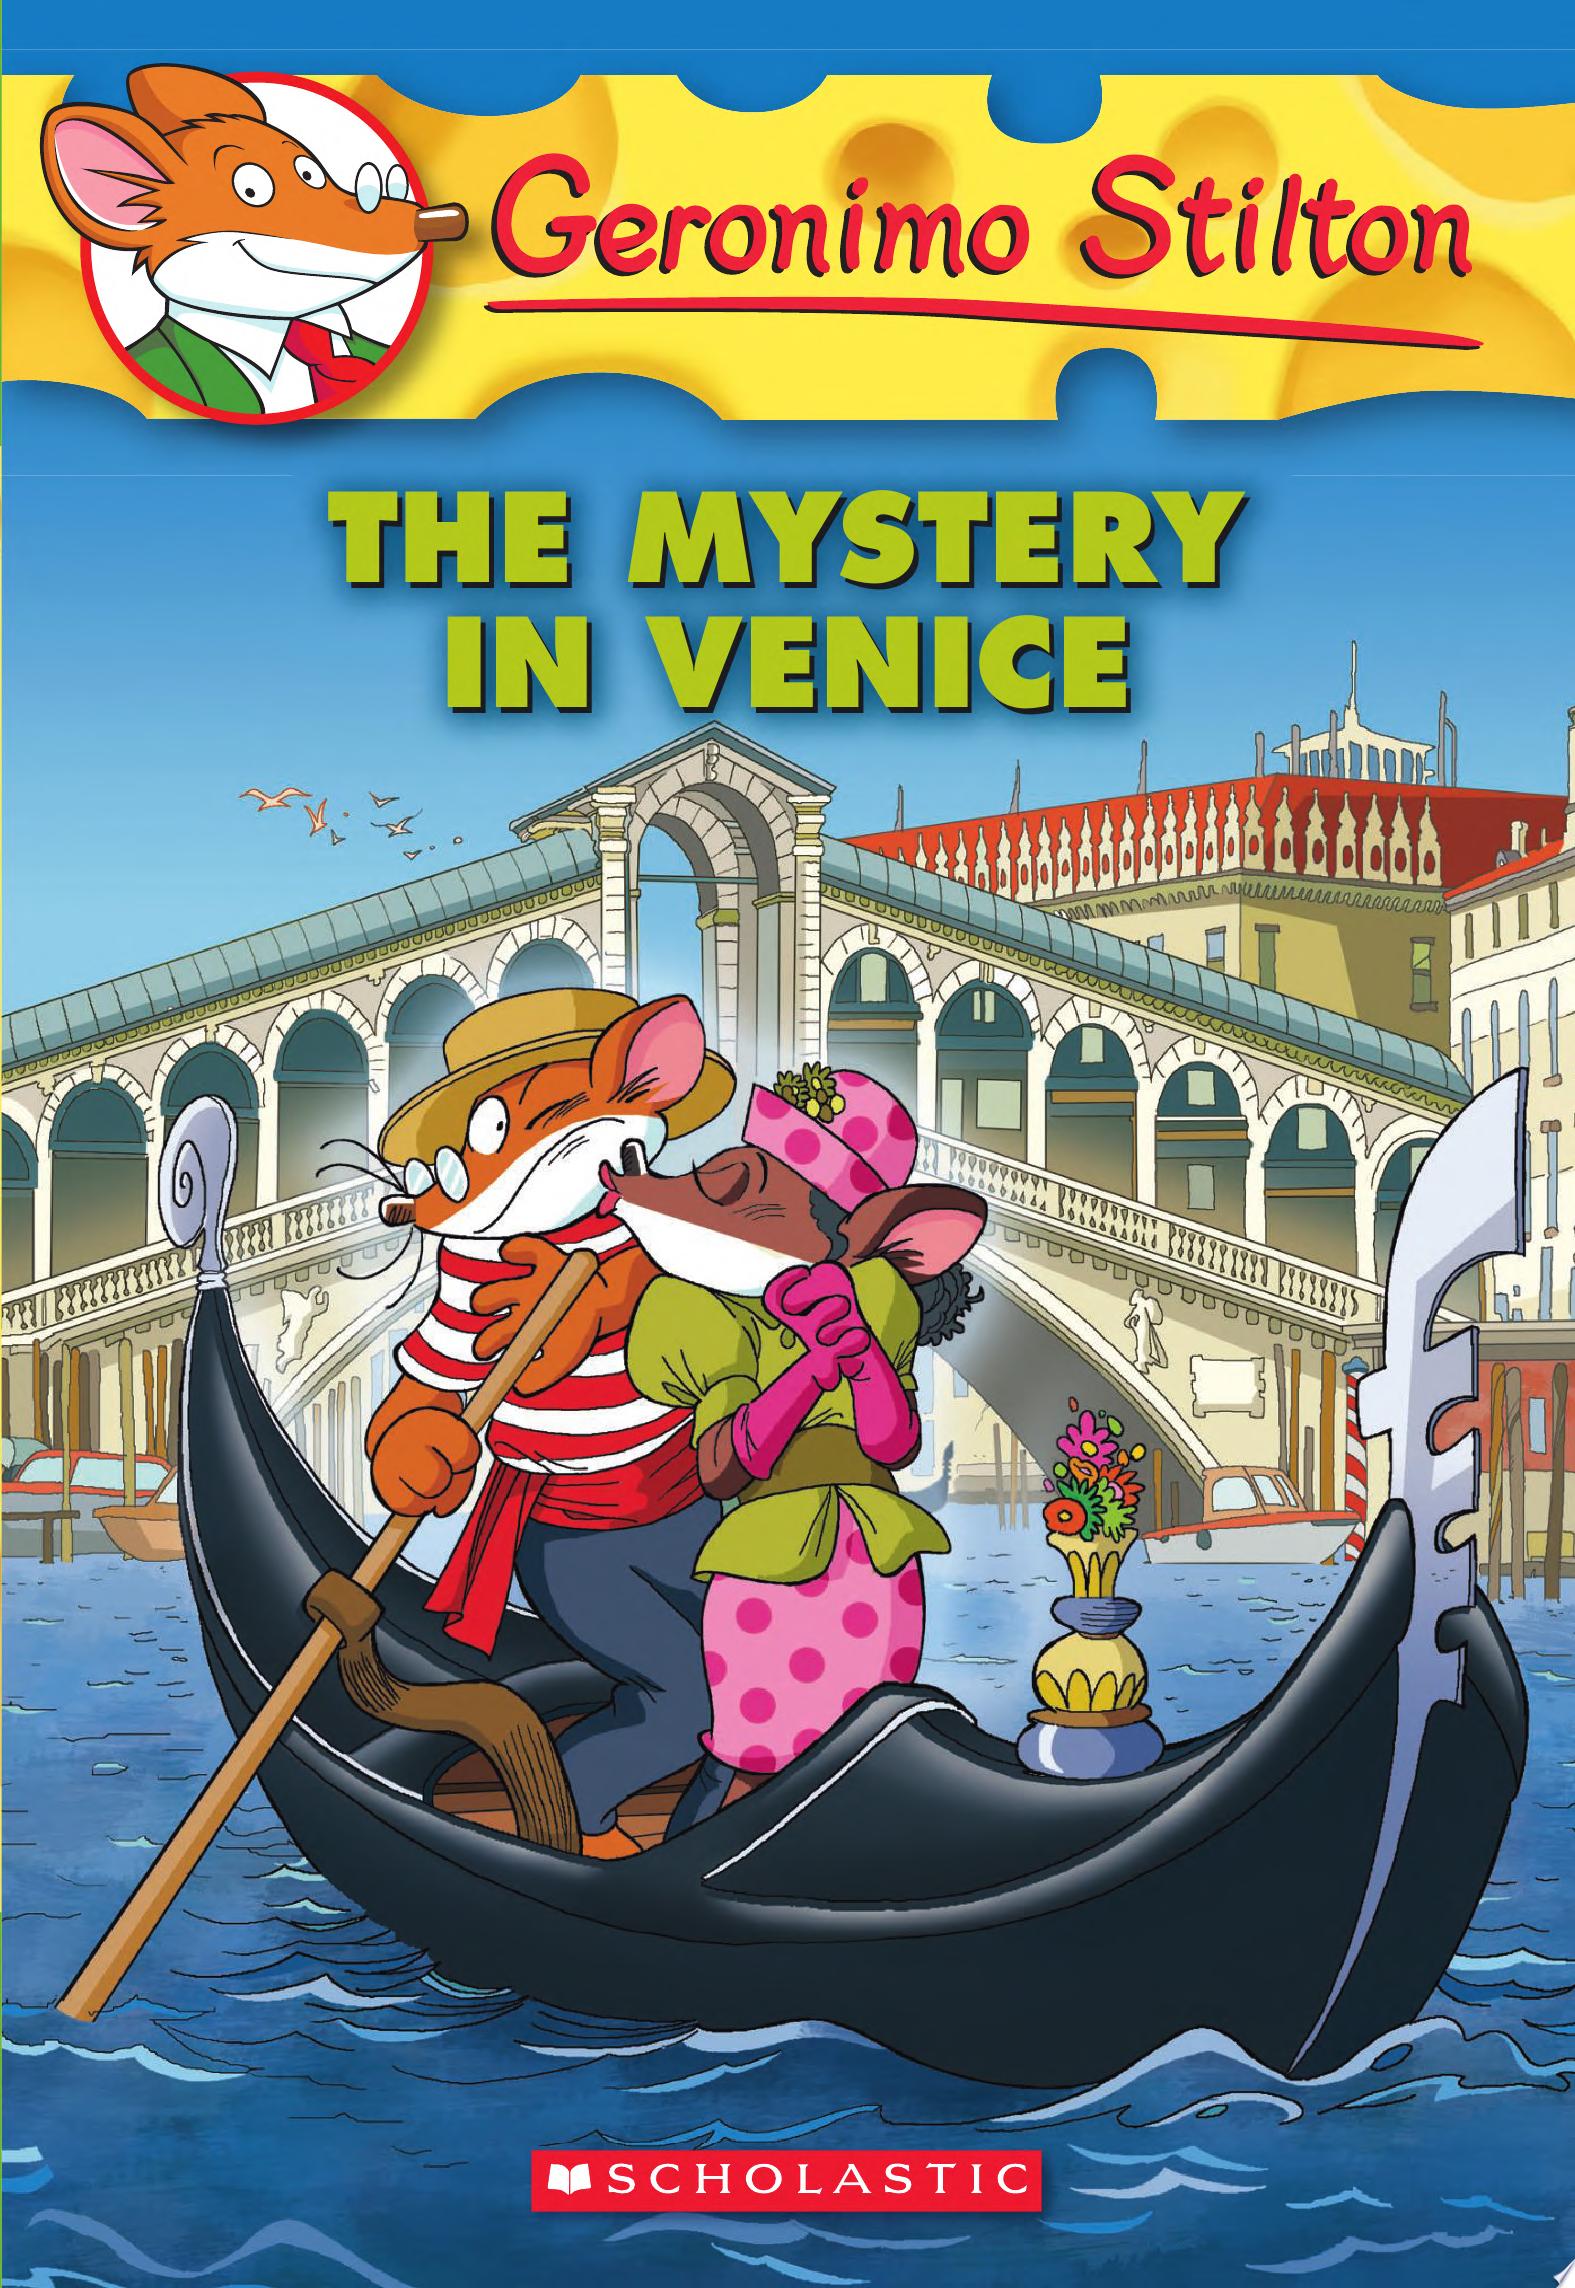 Image for "The Mystery in Venice"